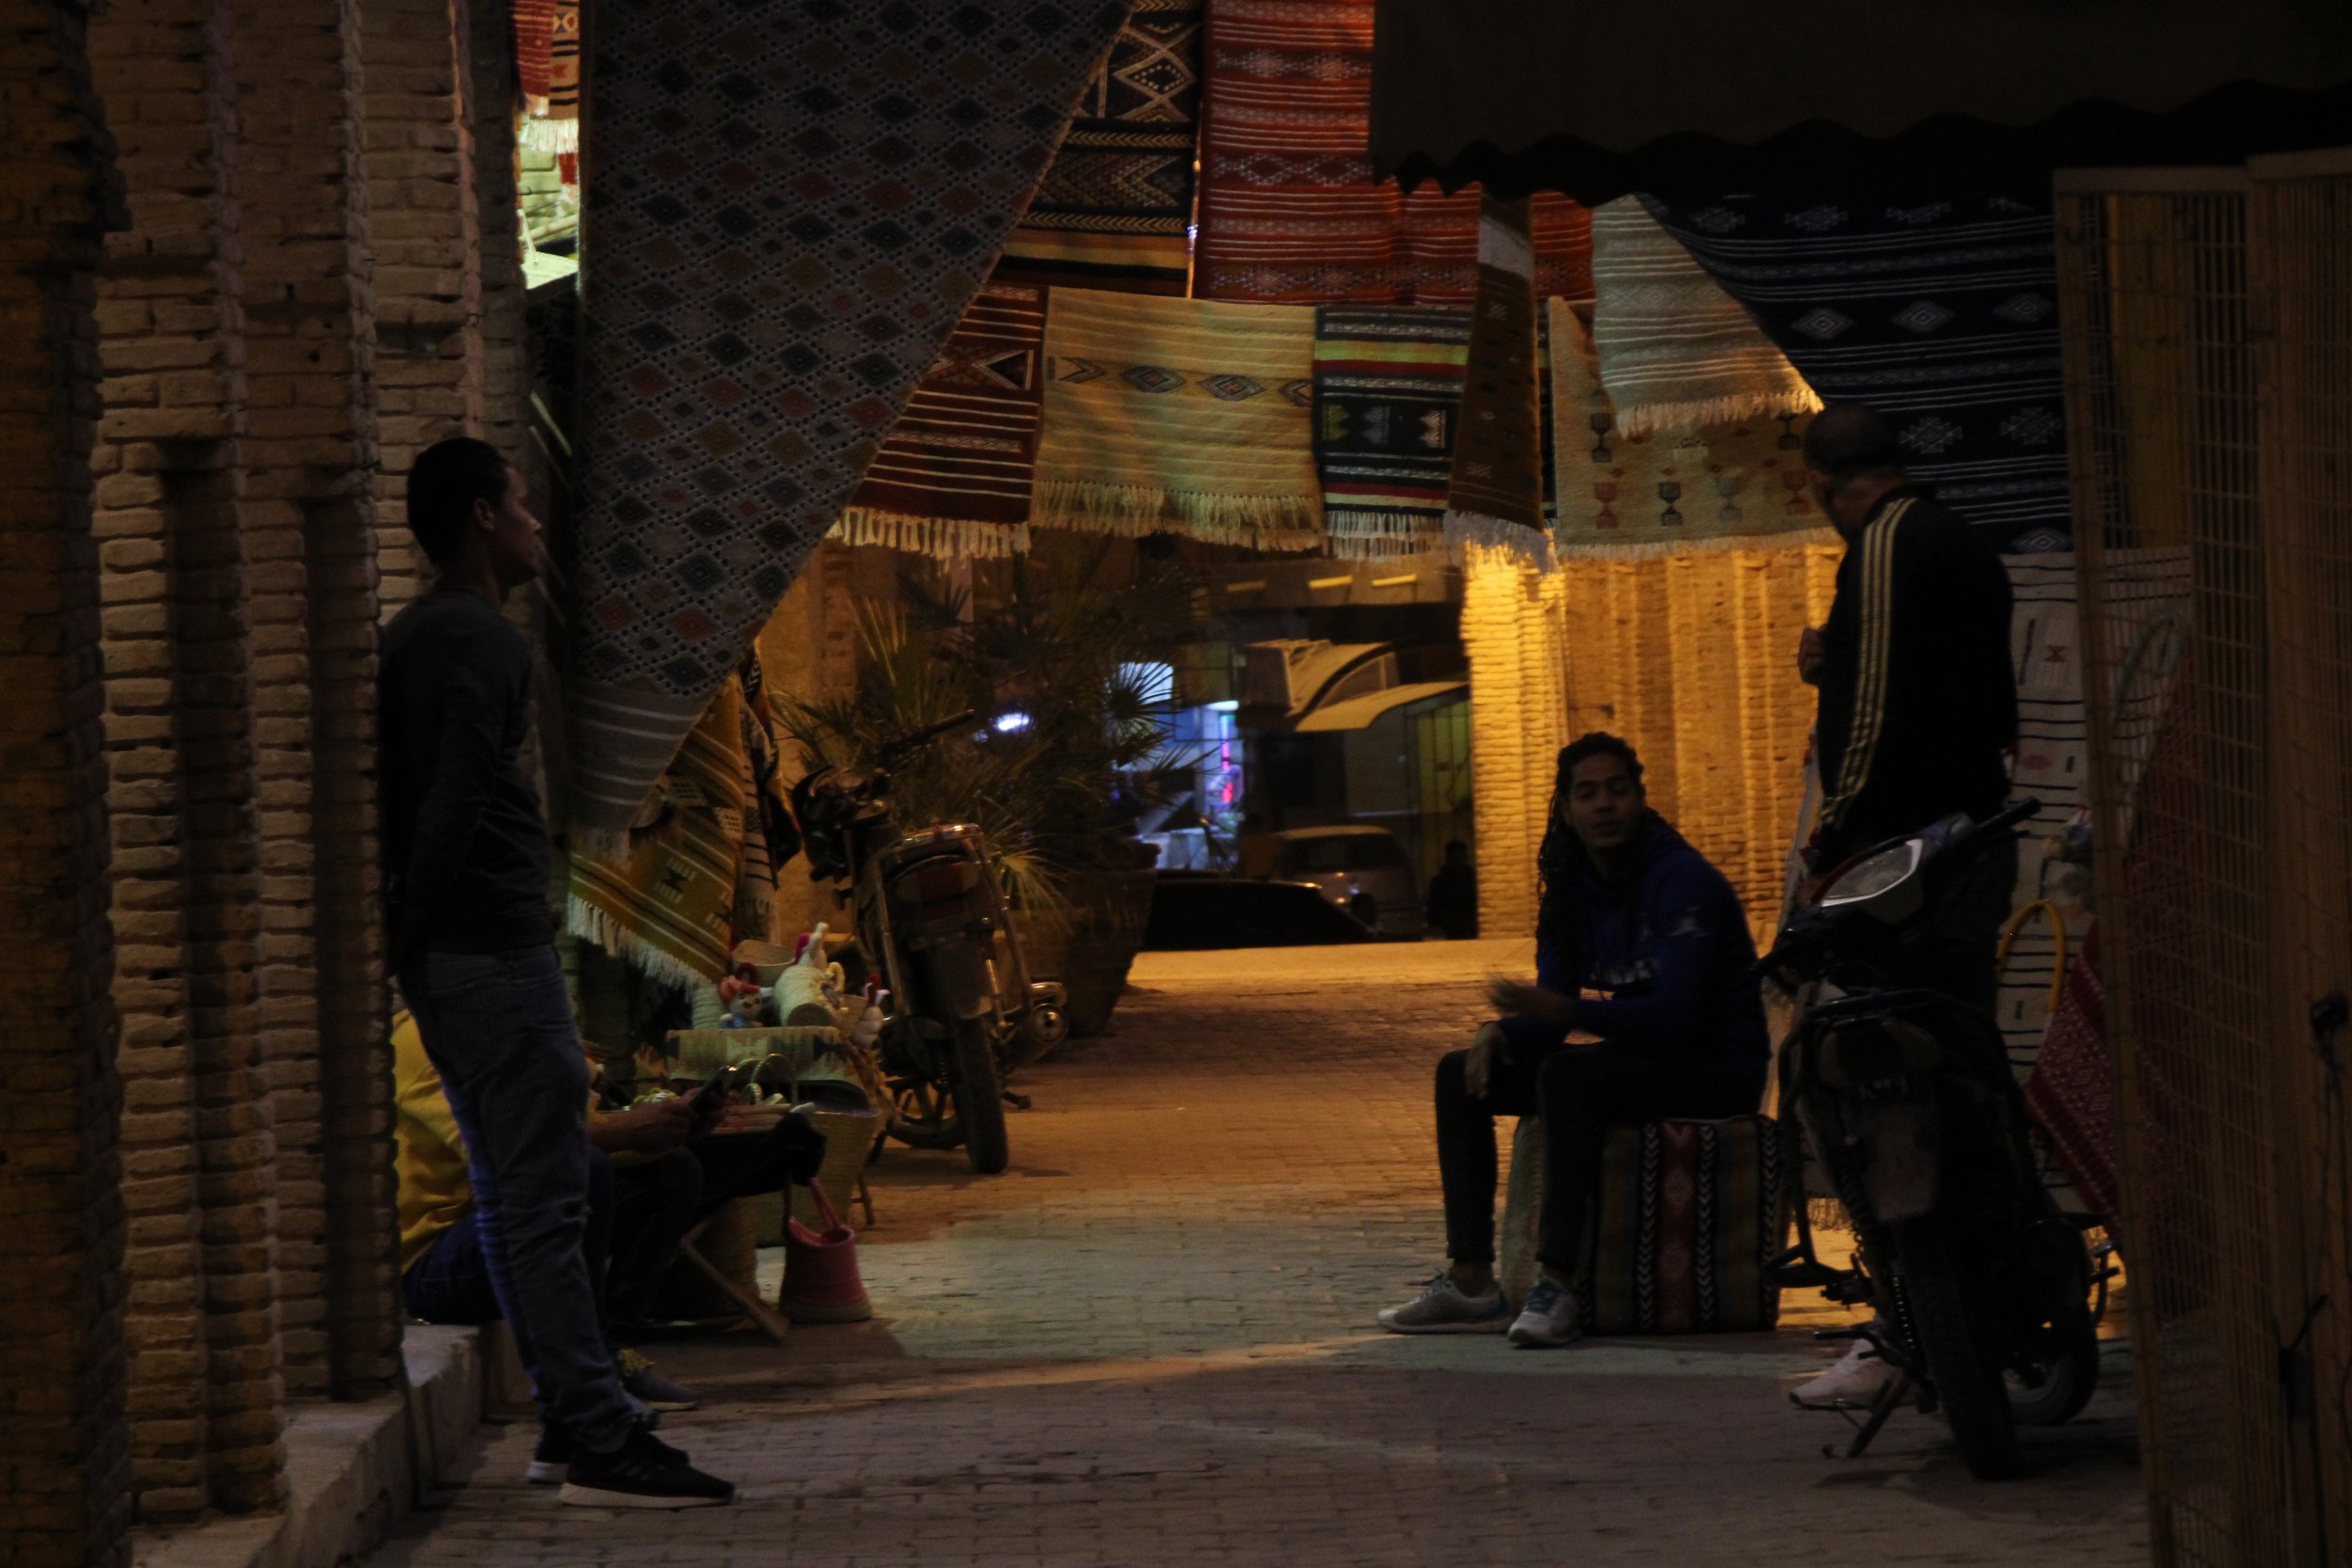  PICTURED: Carpet salesmen chat after shops close for the night. PC: Andrew Corbley © 